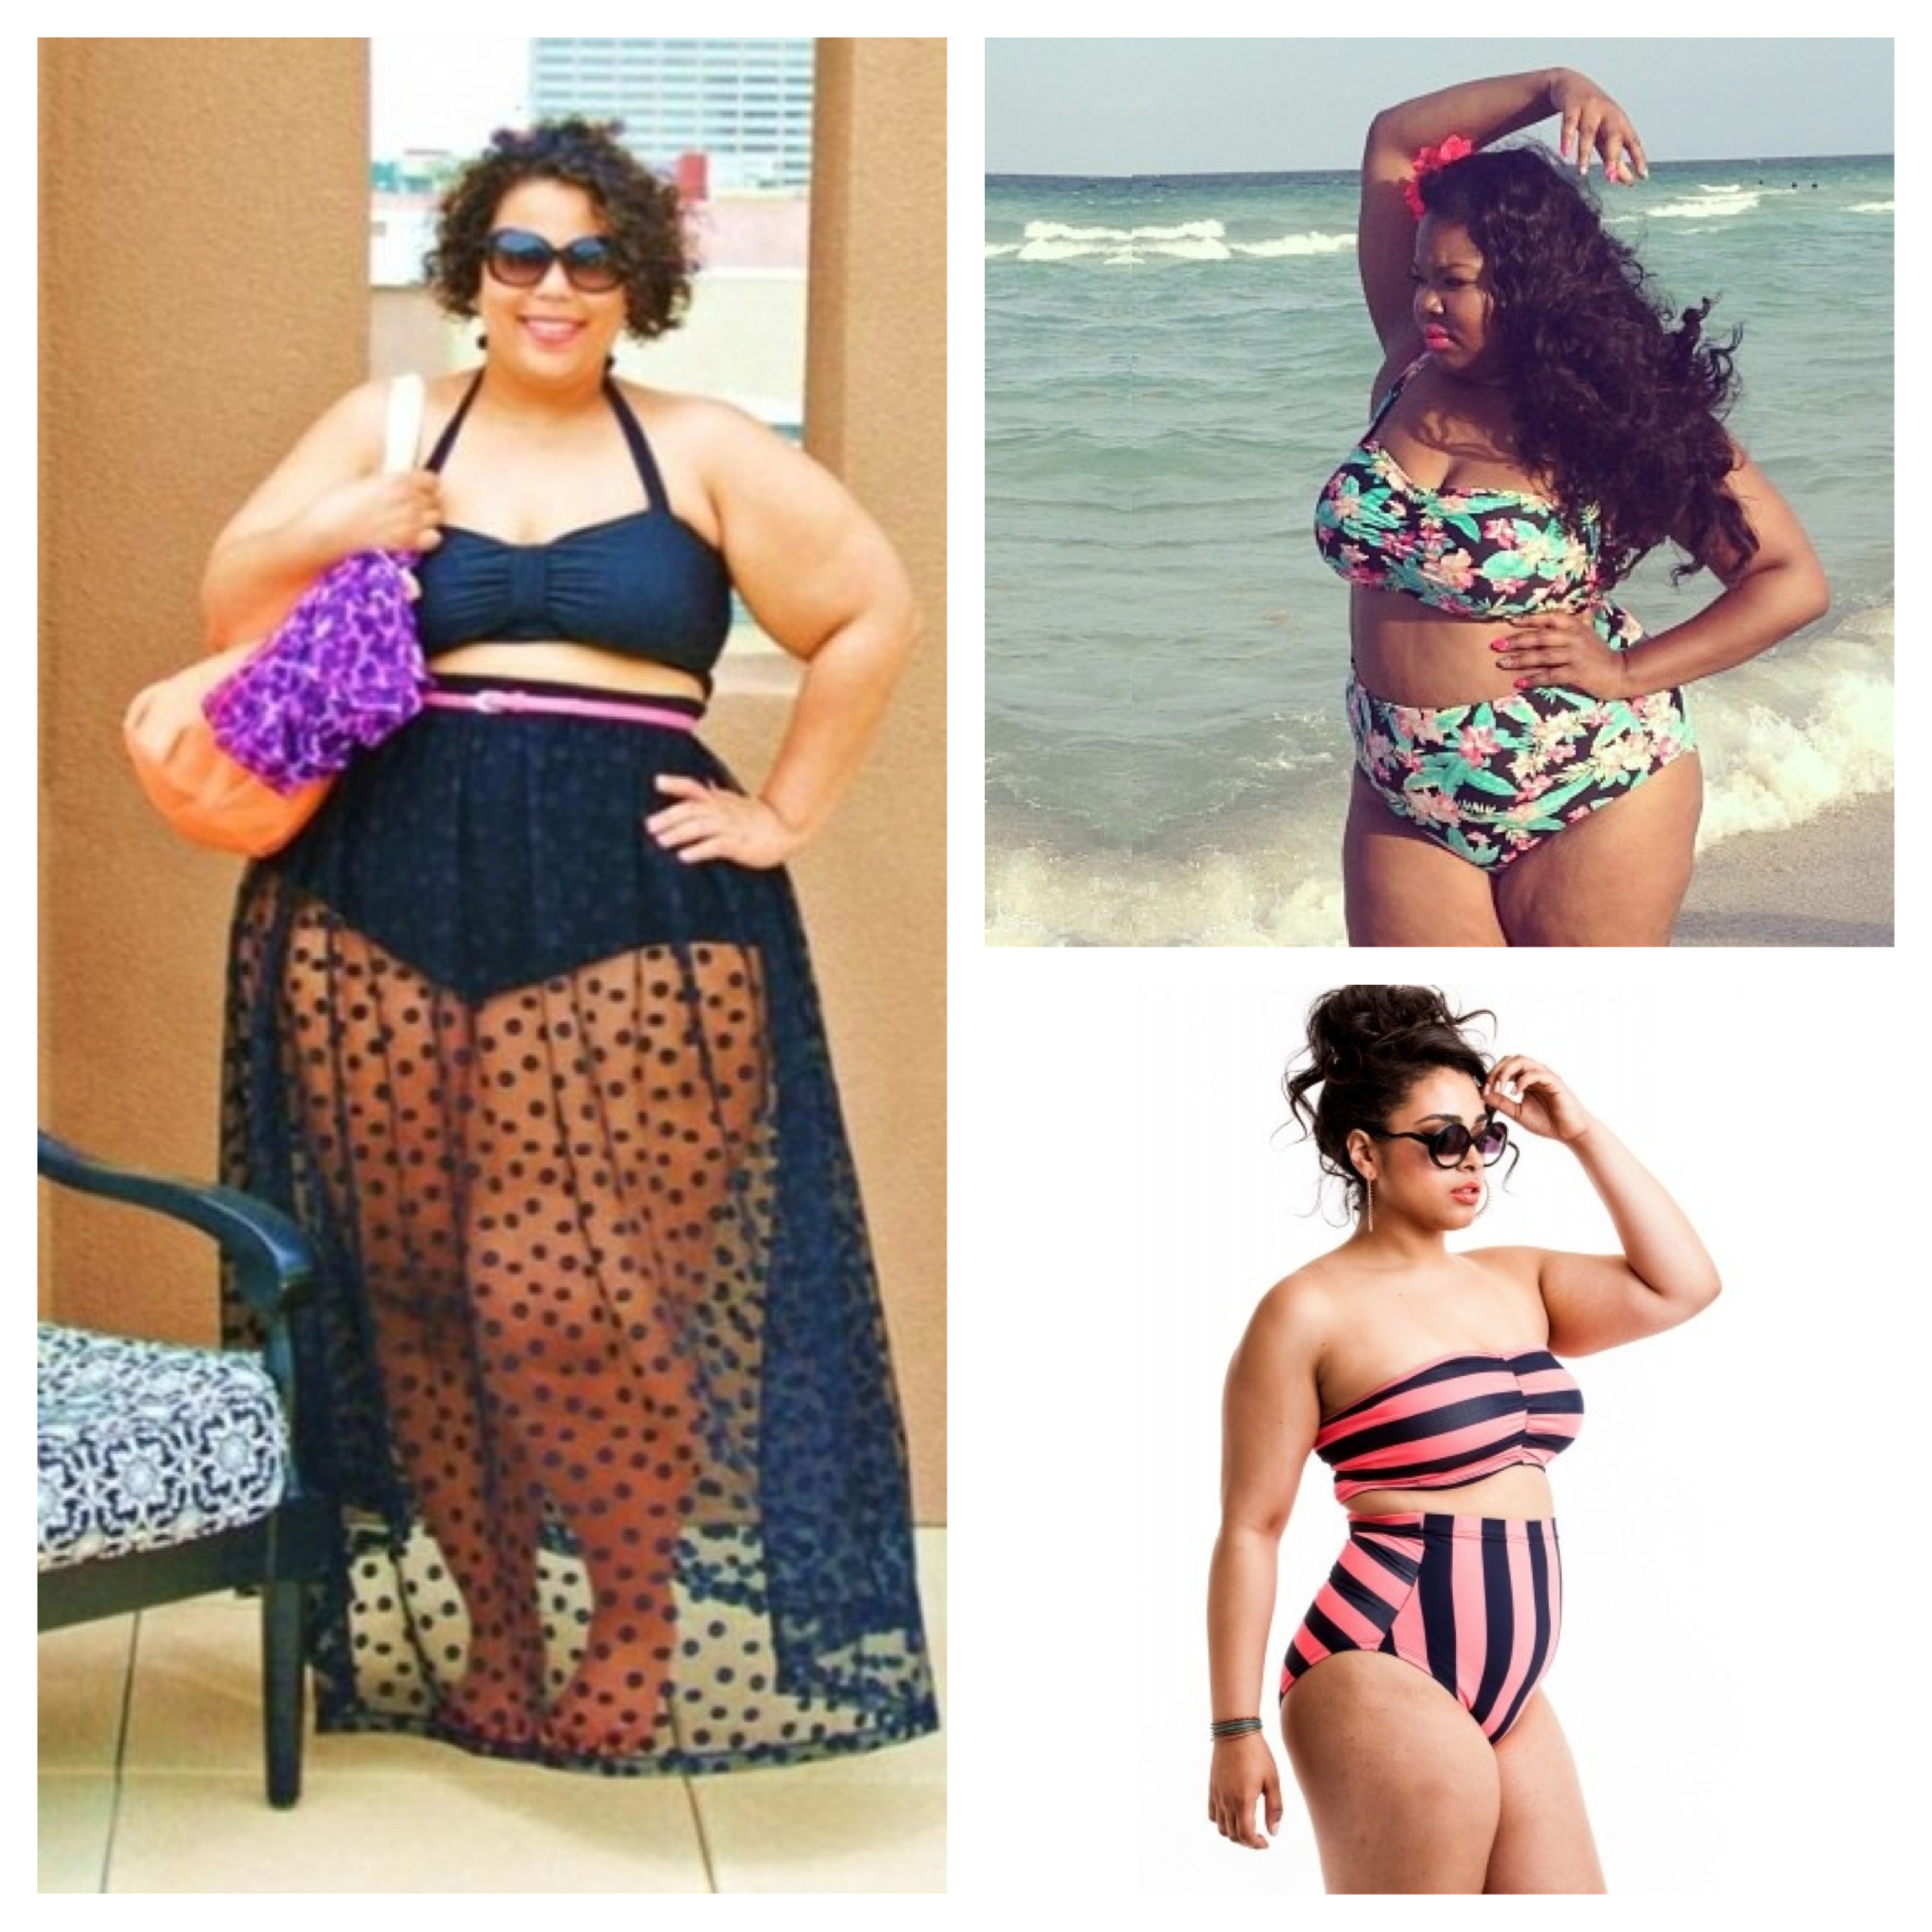 Skinny Girls Aren't The Only Ones Who Can Rock A Bikini! Introducing ' Fatkini' For Women With Curves - theJasmineBRAND